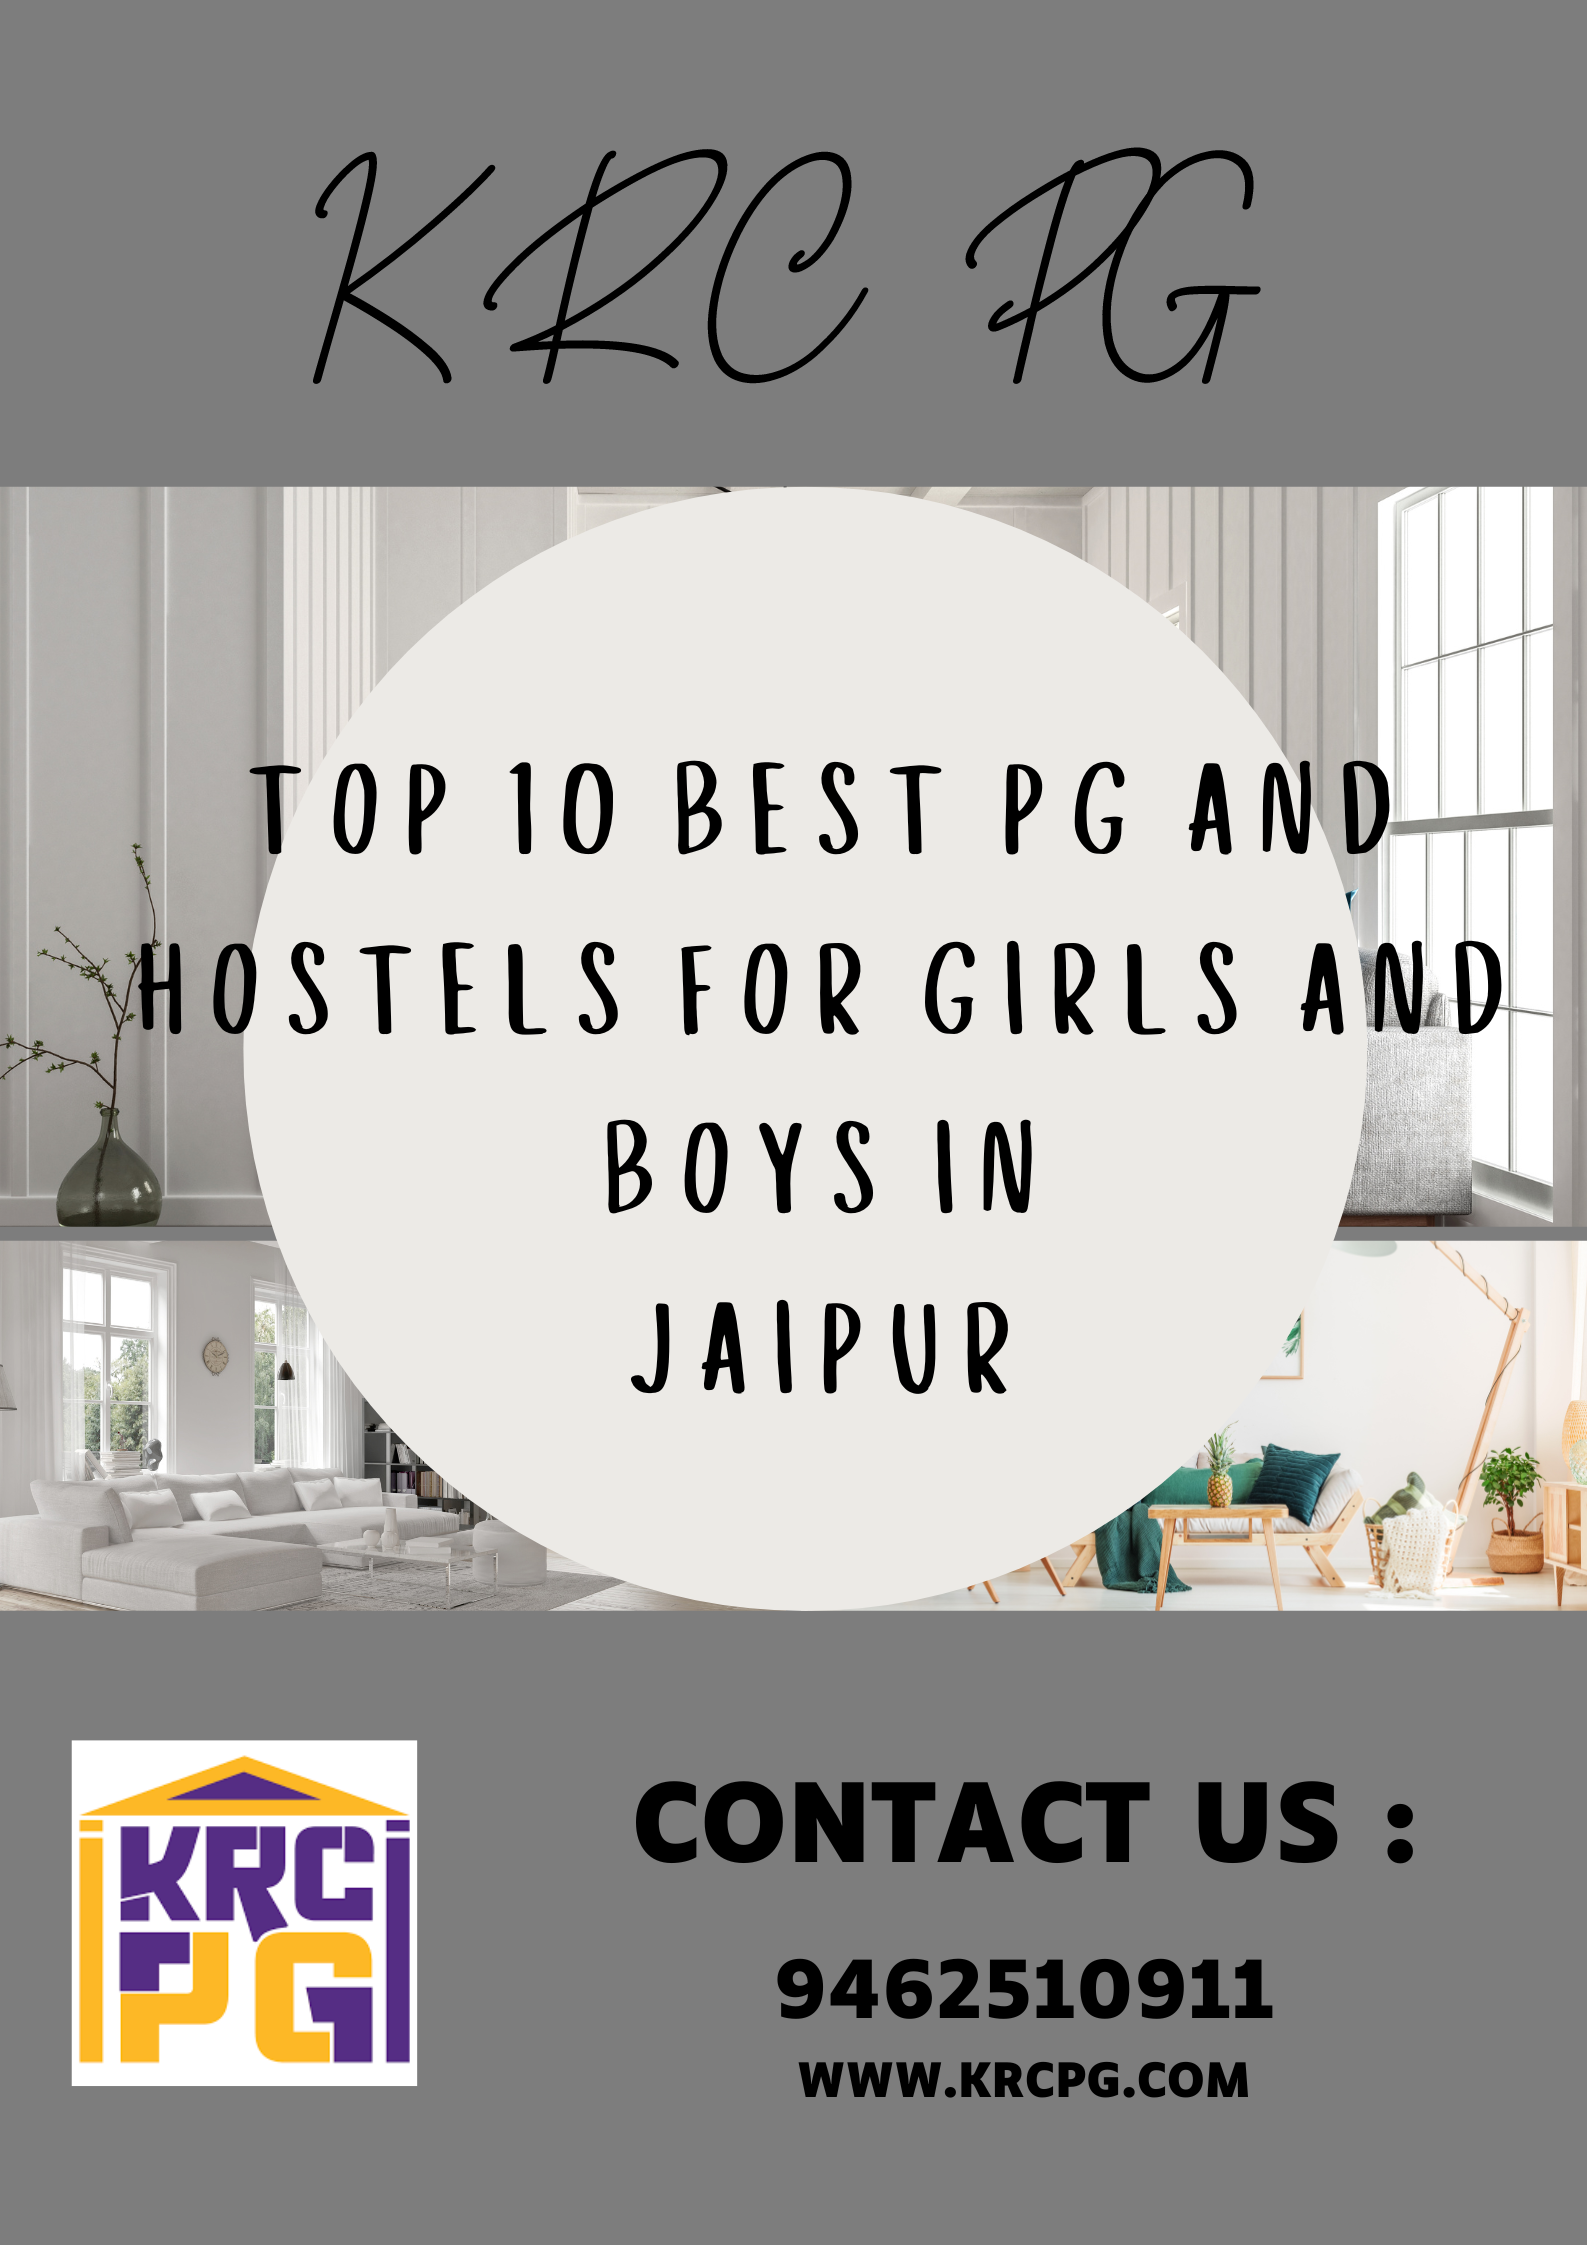 TOP 10 BEST PG AND HOSTELS IN JAIPUR FOR BOYS AND GIRLS